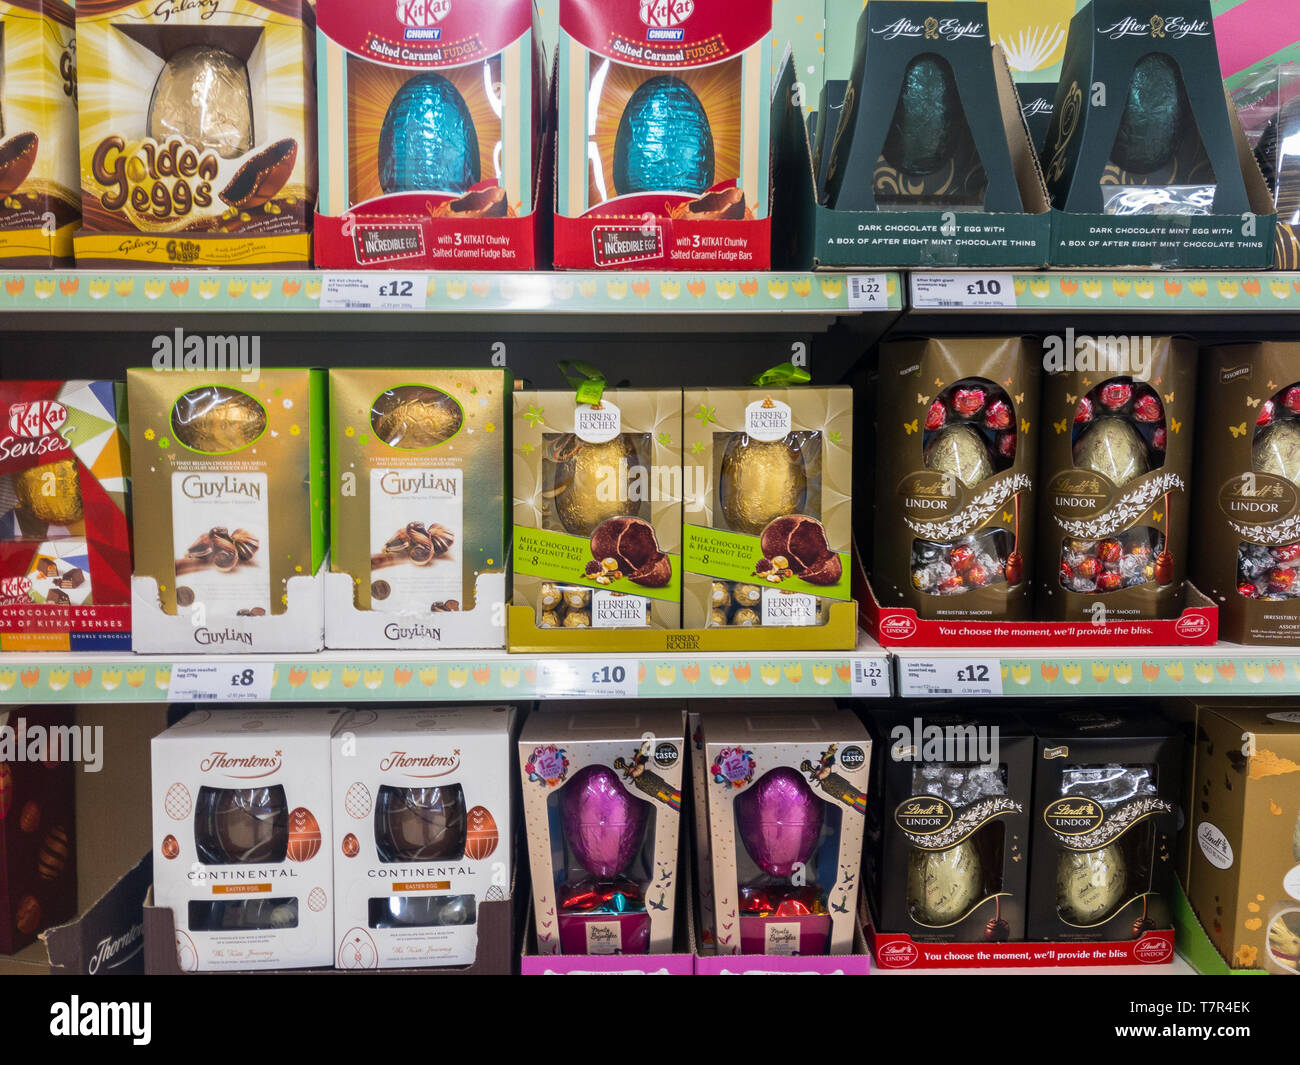 Exeter, Devon , England, March, 14, 2019: A UK supermarket filled shelves selling large and expensive chocolate Easter Eggs. Lots of purple and red in the image, horizontal aspect Stock Photo